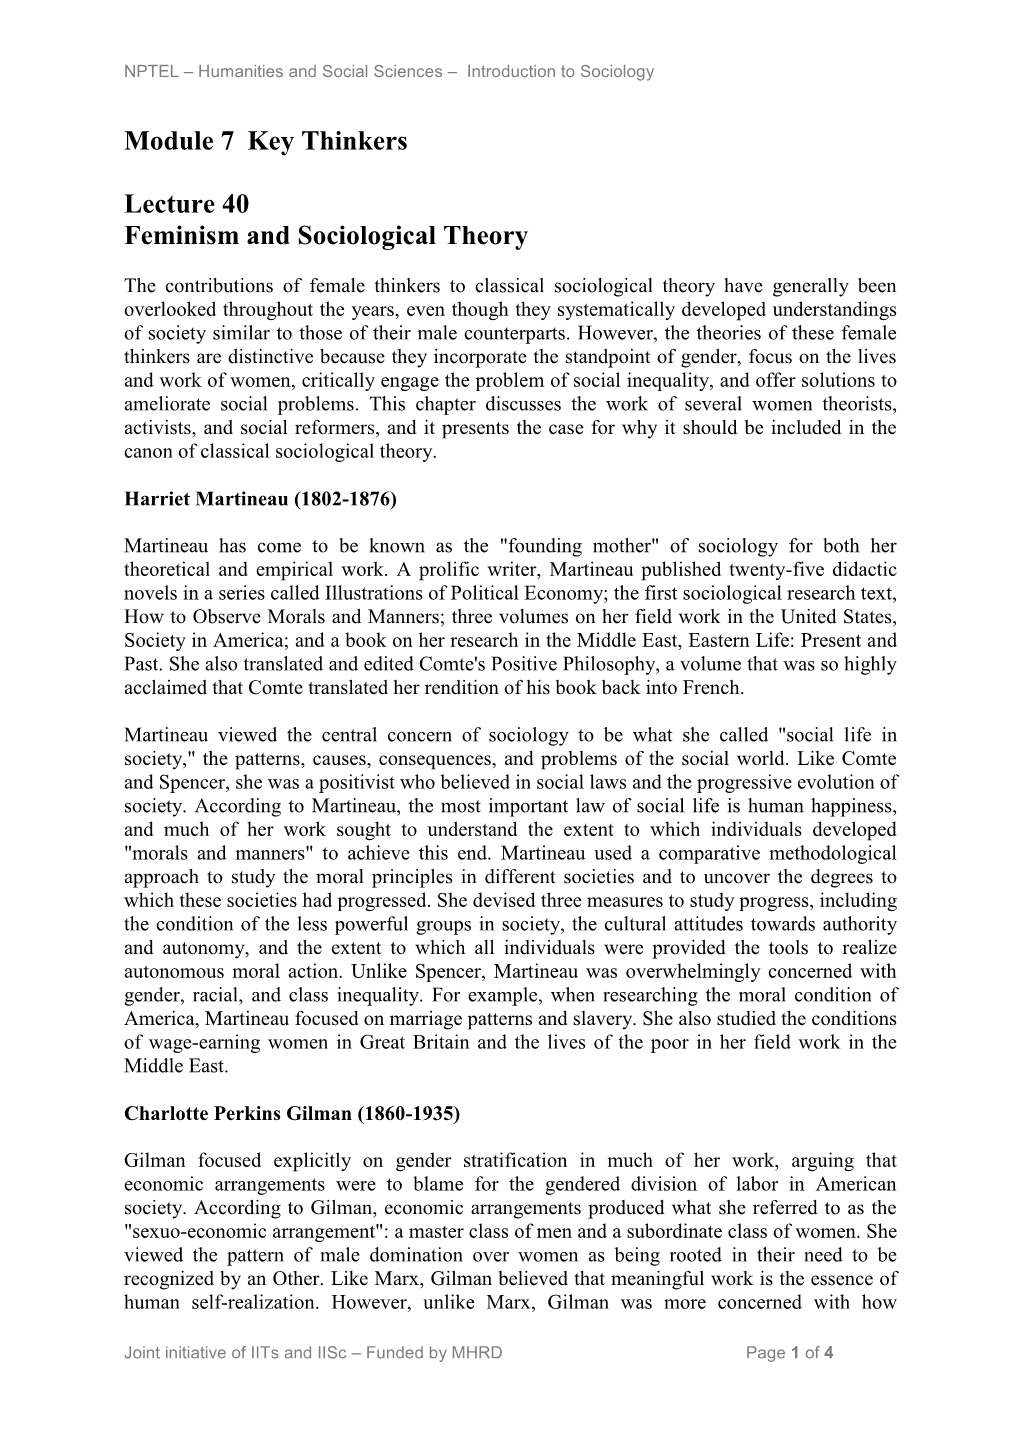 Module 7 Key Thinkers Lecture 40 Feminism and Sociological Theory